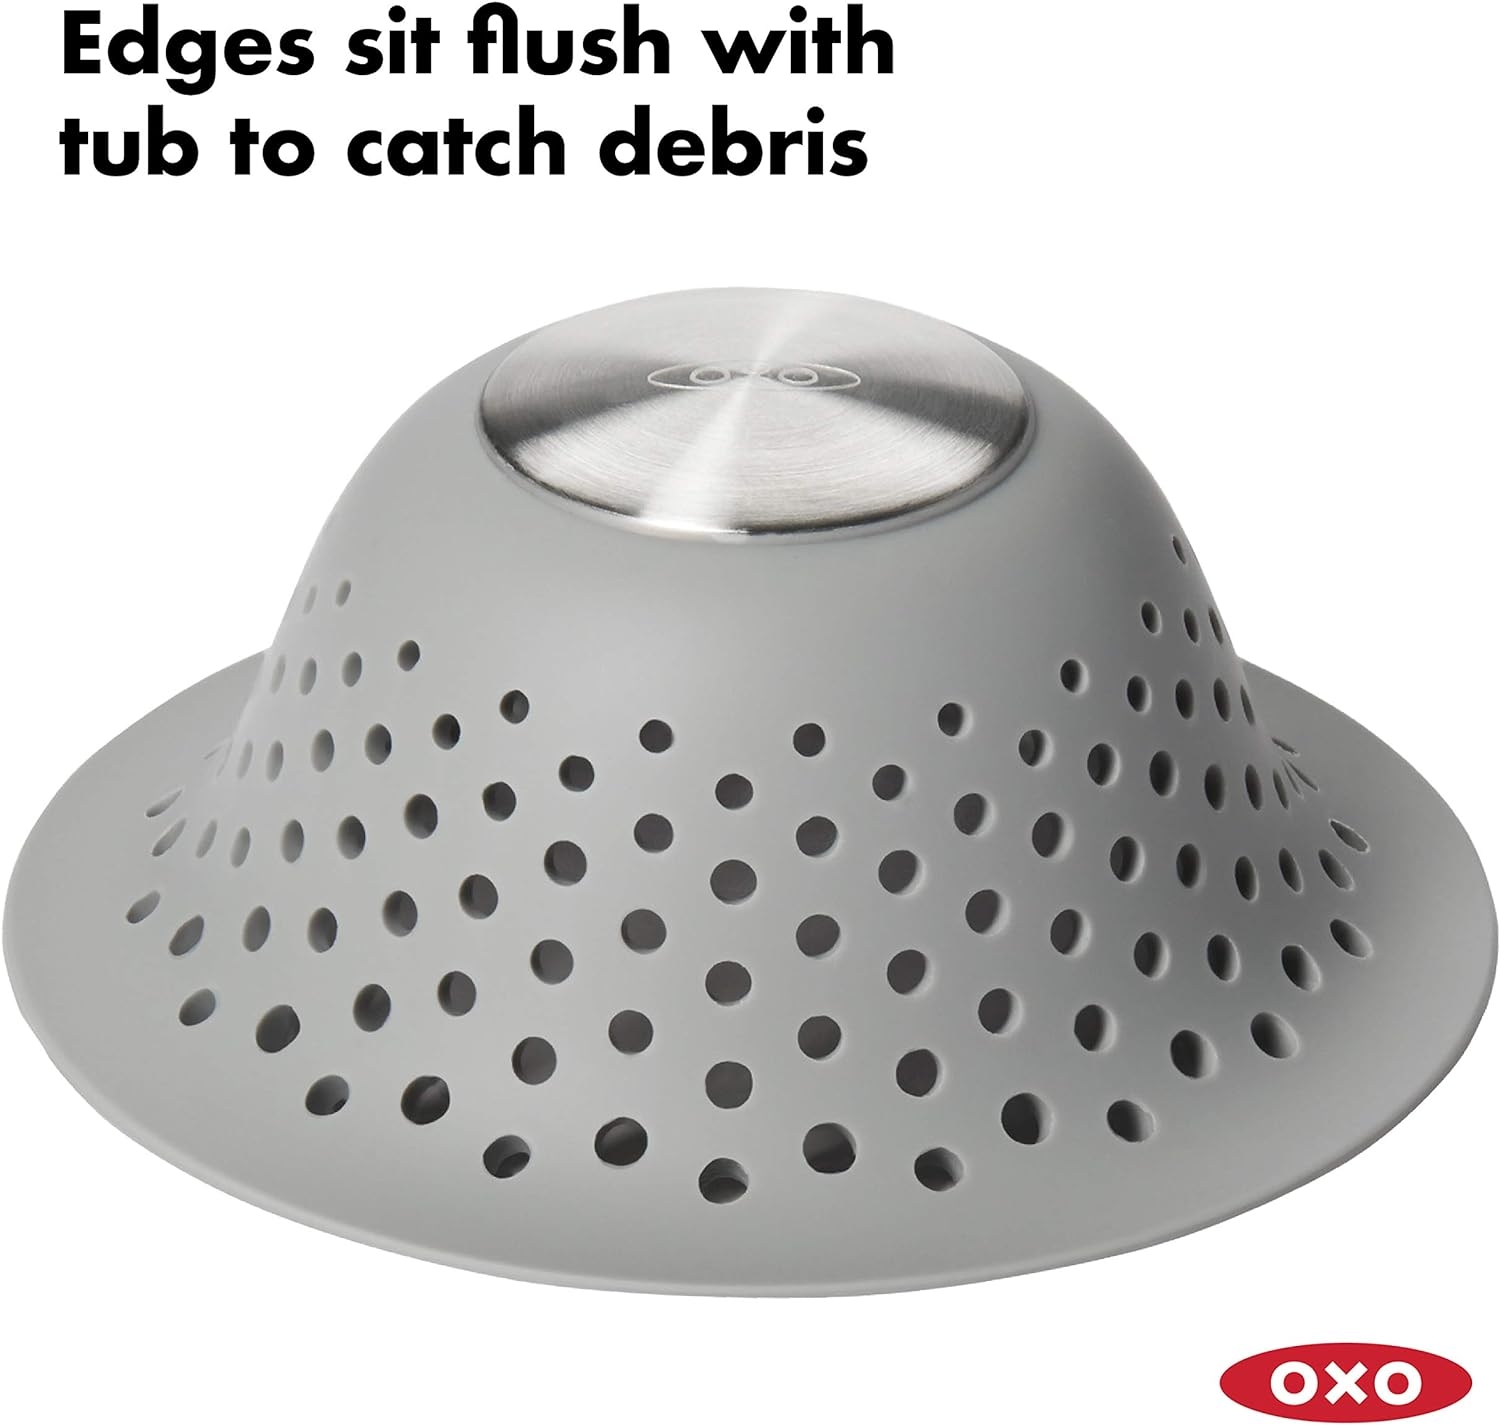 OXO Good Grips Silicone Drain Protector for Pop-Up & Regular Drains, Grey, One Size